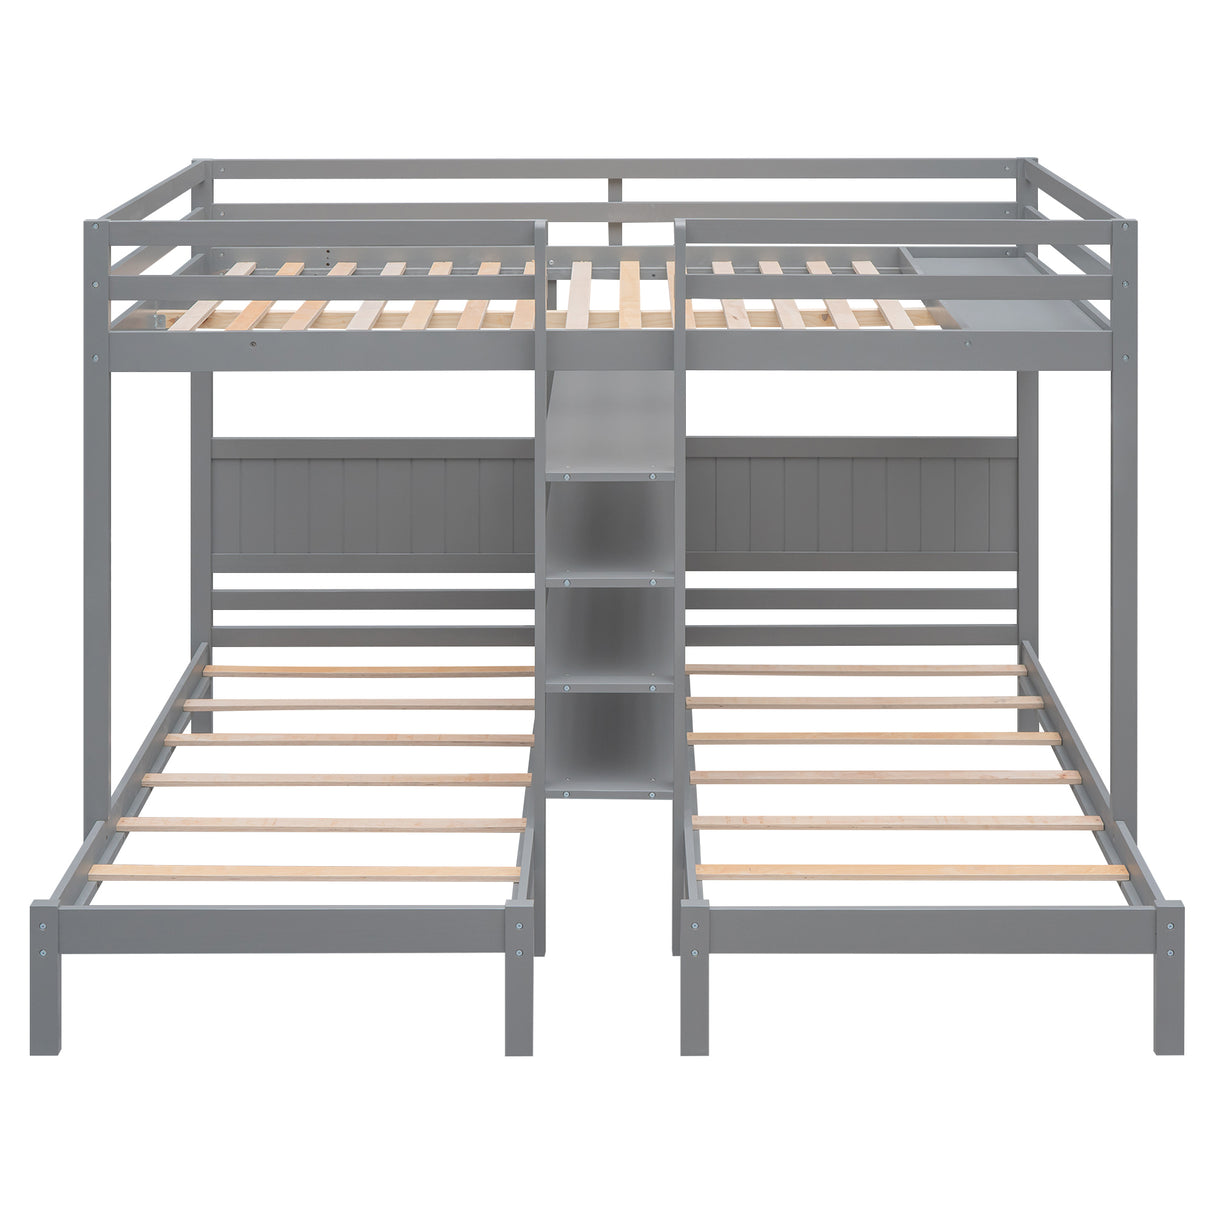 Full XL over Twin&Twin Bunk Bed with Built-in Four Shelves and Ladder,Gray - Home Elegance USA